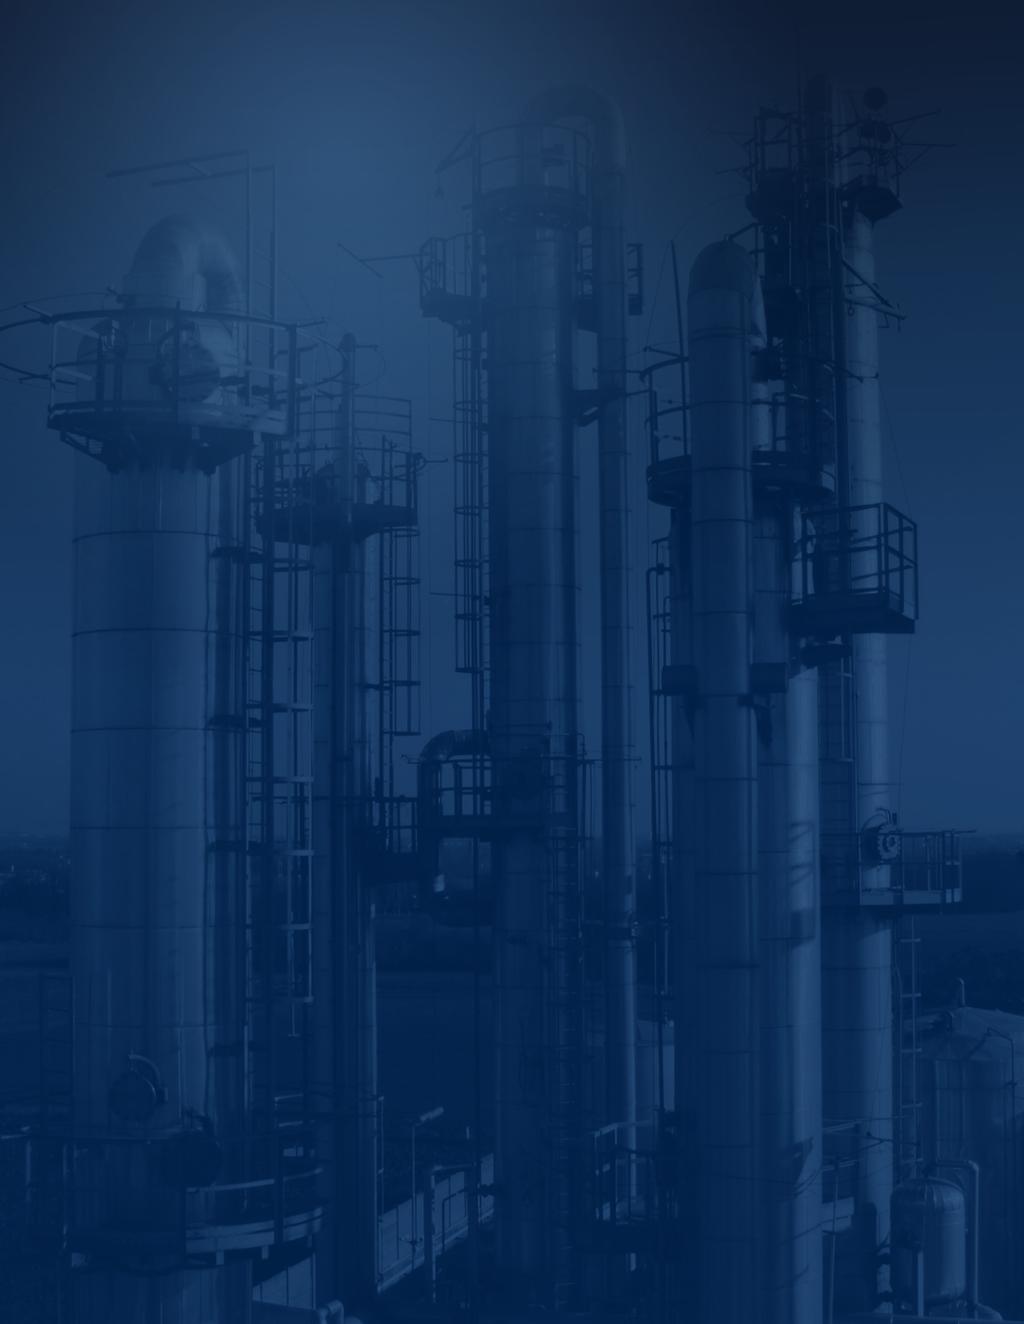 Acuren is a single source provider of technology-enabled asset protection solutions used to evaluate the structural integrity of critical energy, industrial and public infrastructure.